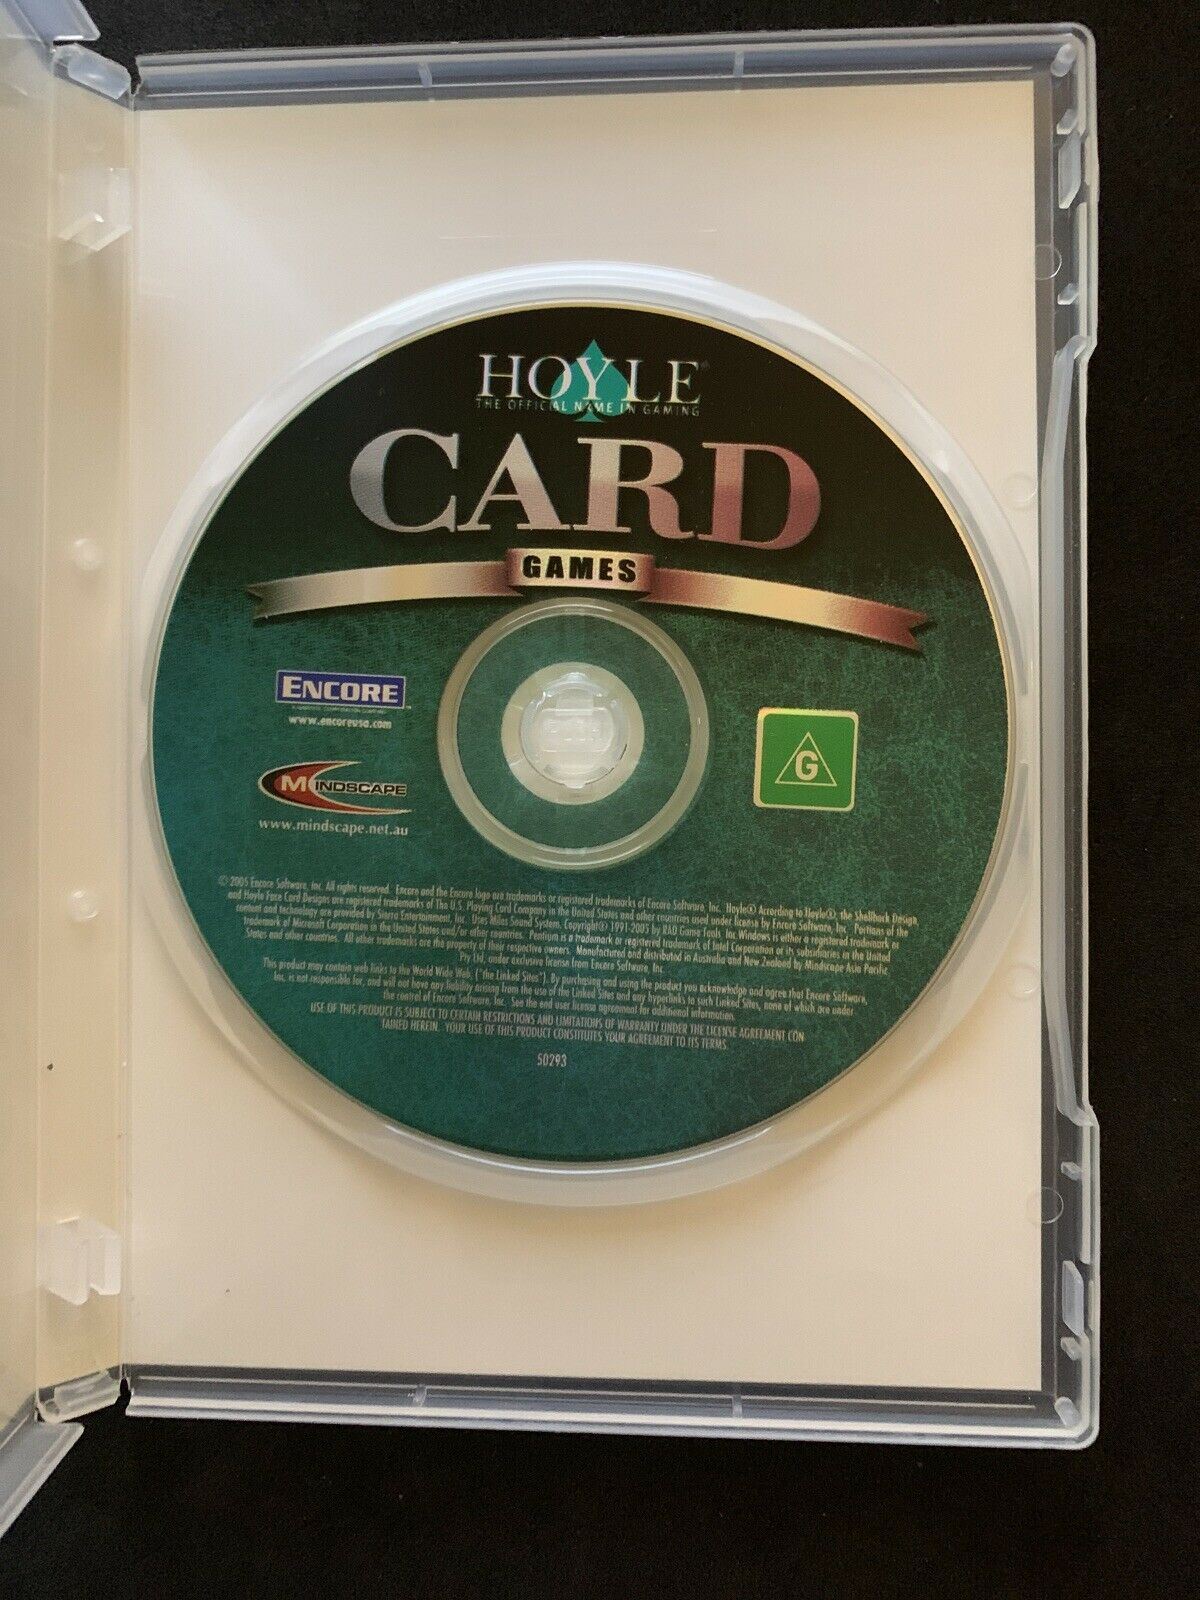 Hoyle Official Card Games: Over 70 Card Games - PC CD Windows Game